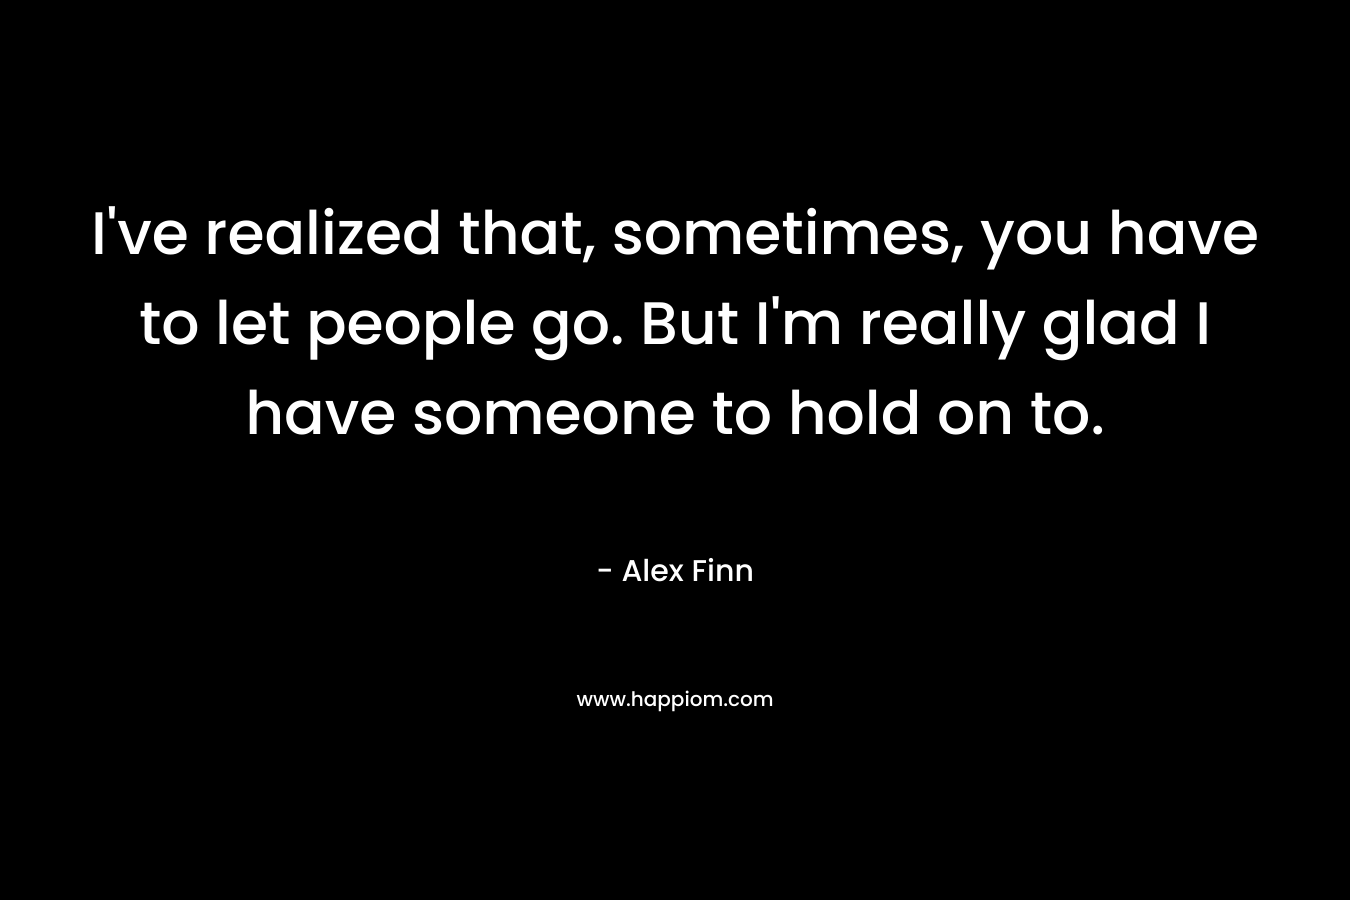 I’ve realized that, sometimes, you have to let people go. But I’m really glad I have someone to hold on to. – Alex Finn